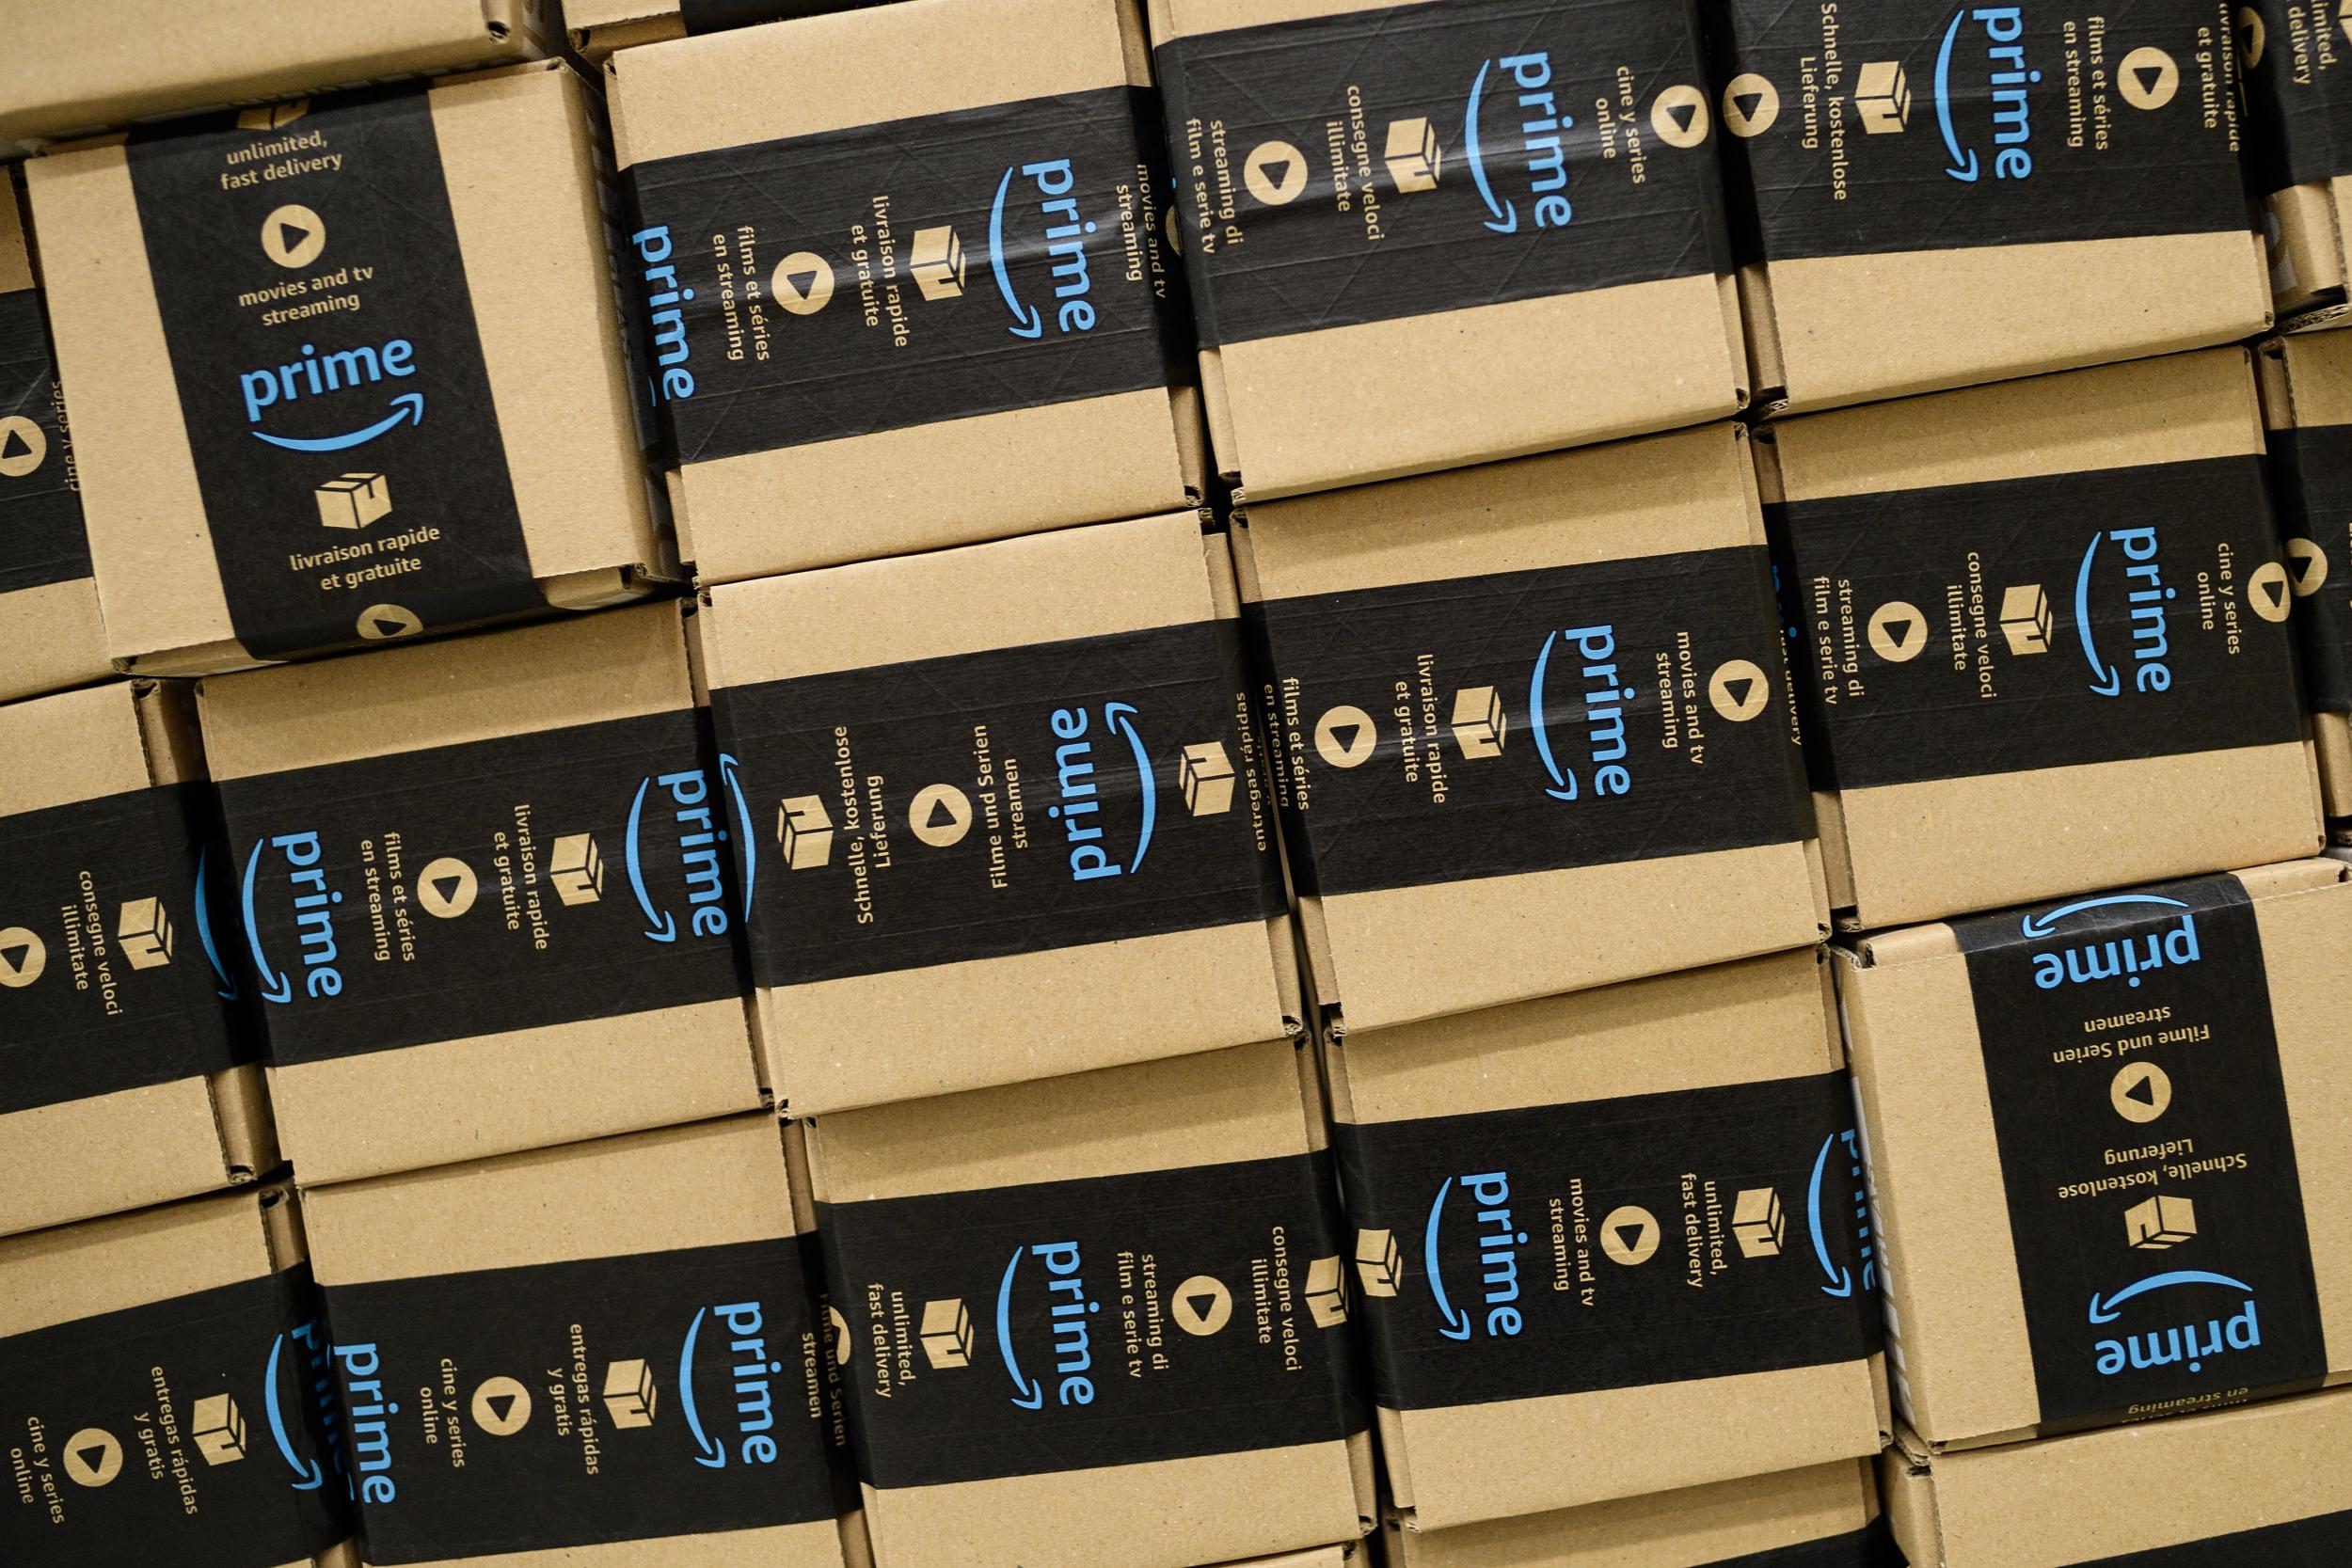 Amazon responded to consumer group by saying it never advertised Prime Day as the best time to shop on its website